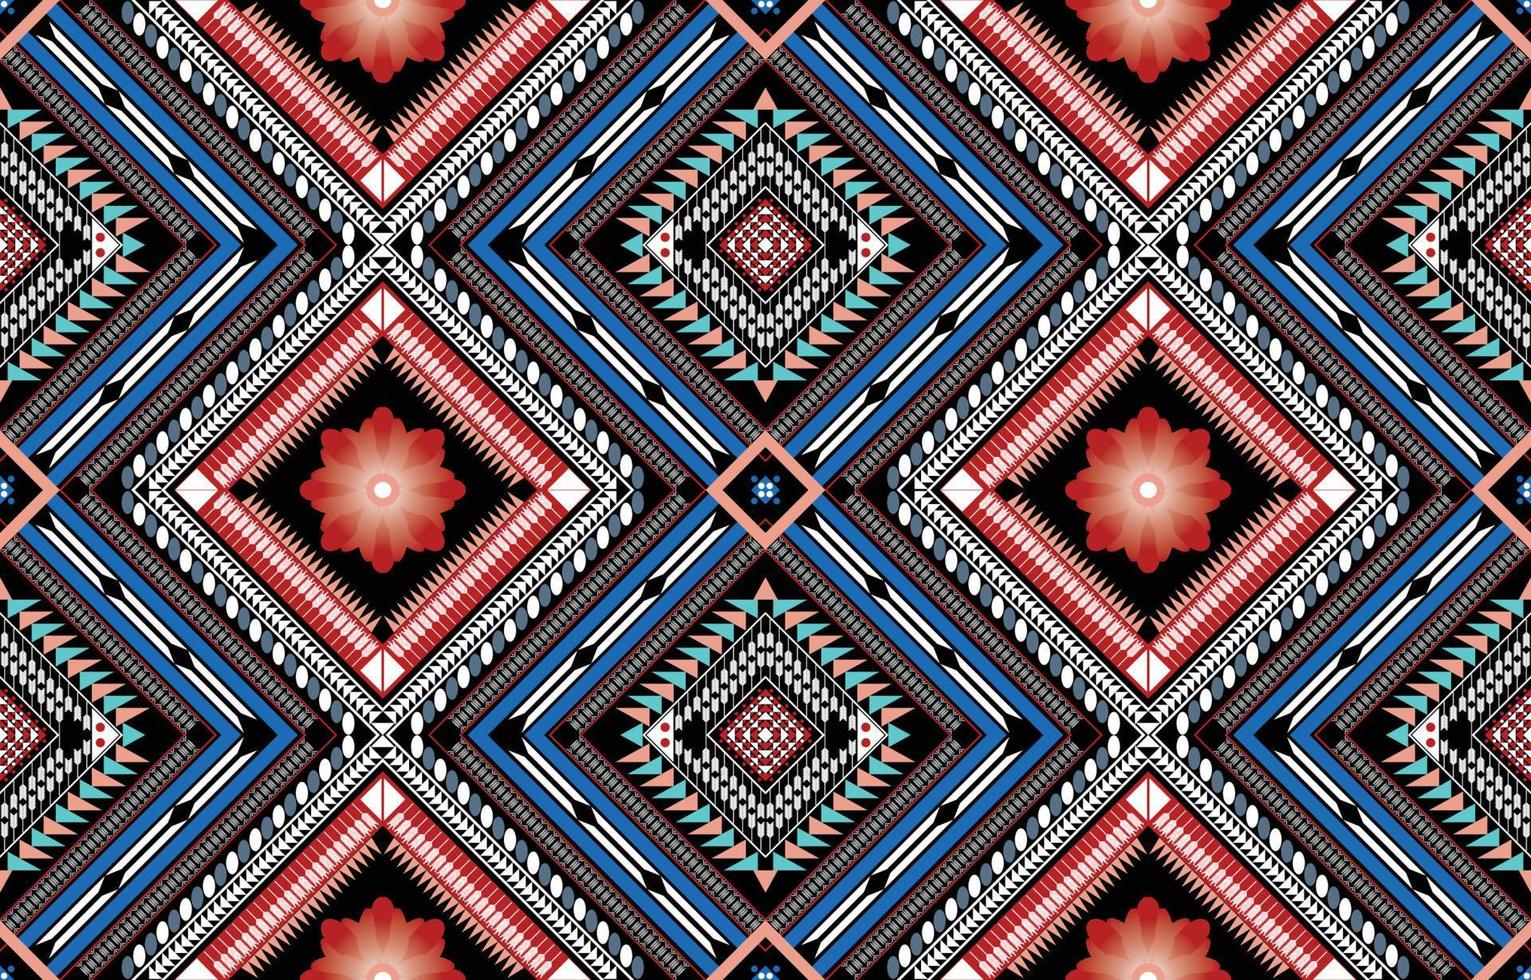 Ethnic navajo seamless pattern. Tribal vector background with decorative folk elements. Aztec abstract geometric art print. Design for rug, tapis, blanket, wallpaper, cloth design, fabric, textile.